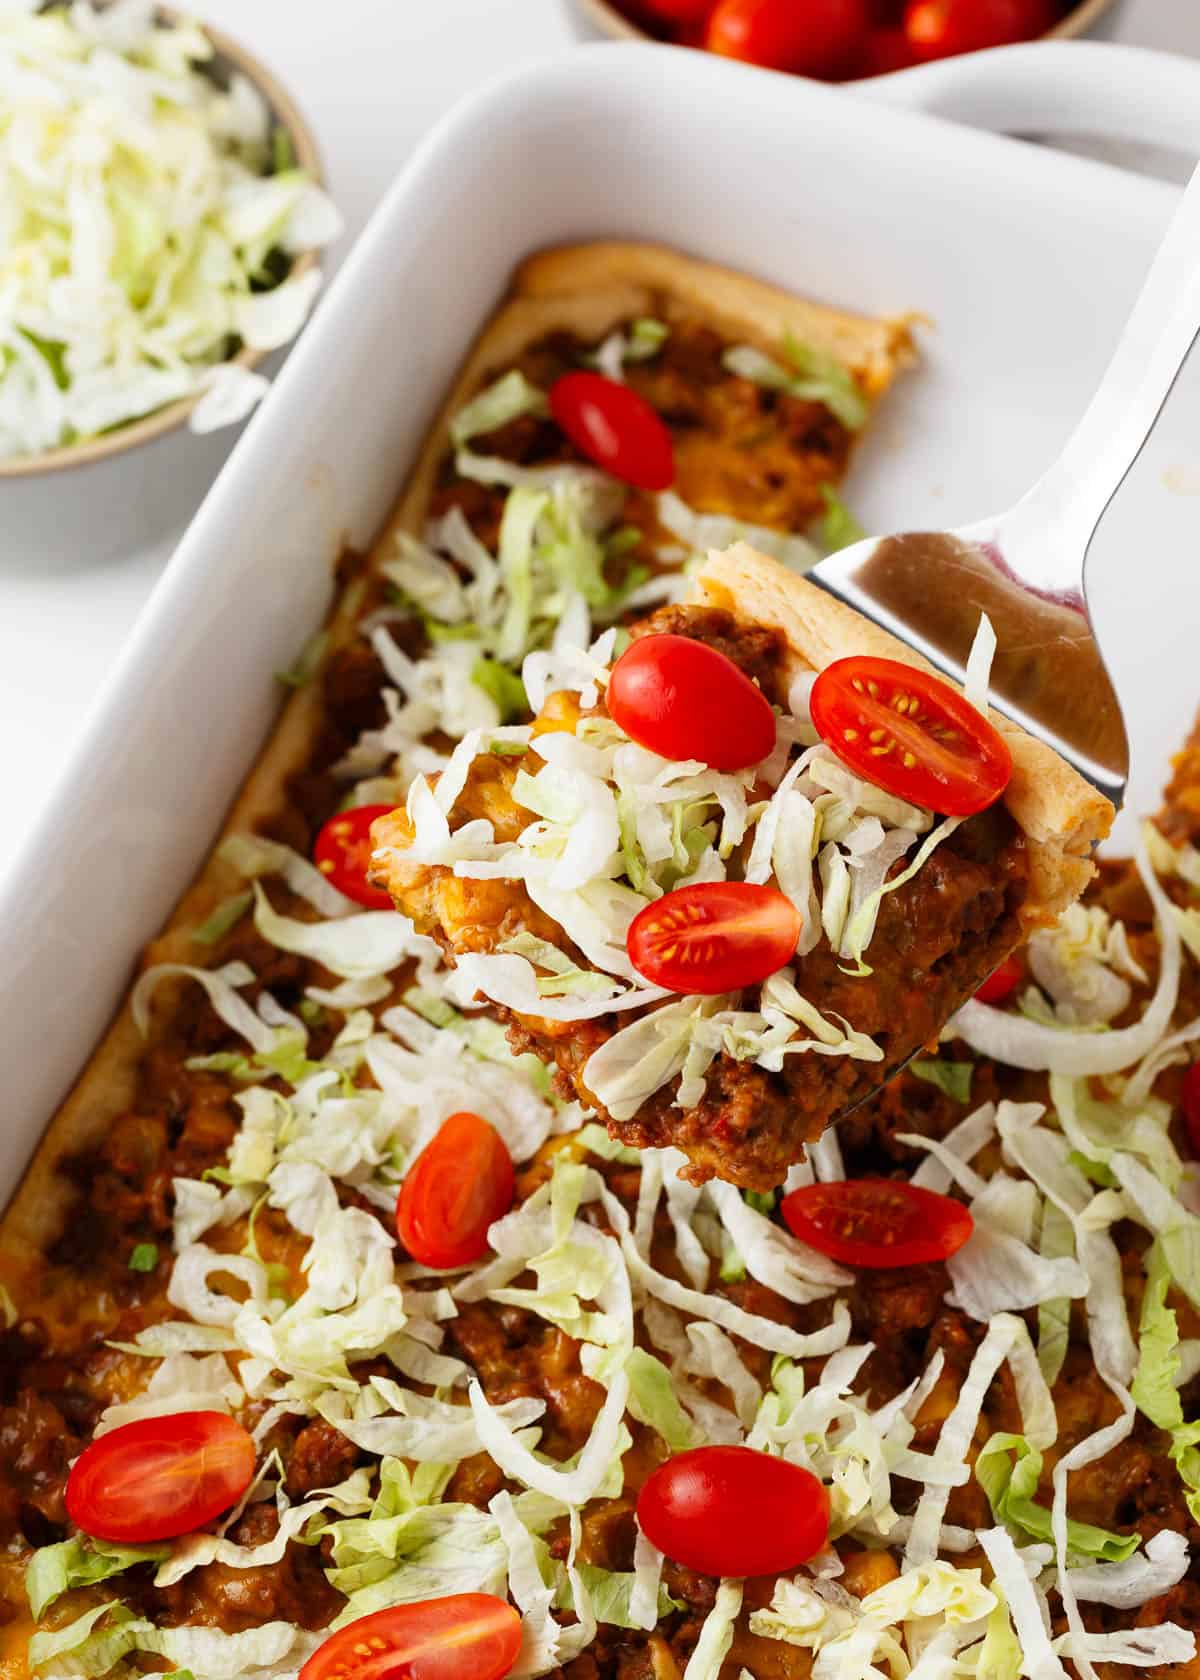 Crescent roll taco bake in a white baking dish with a server spatula.